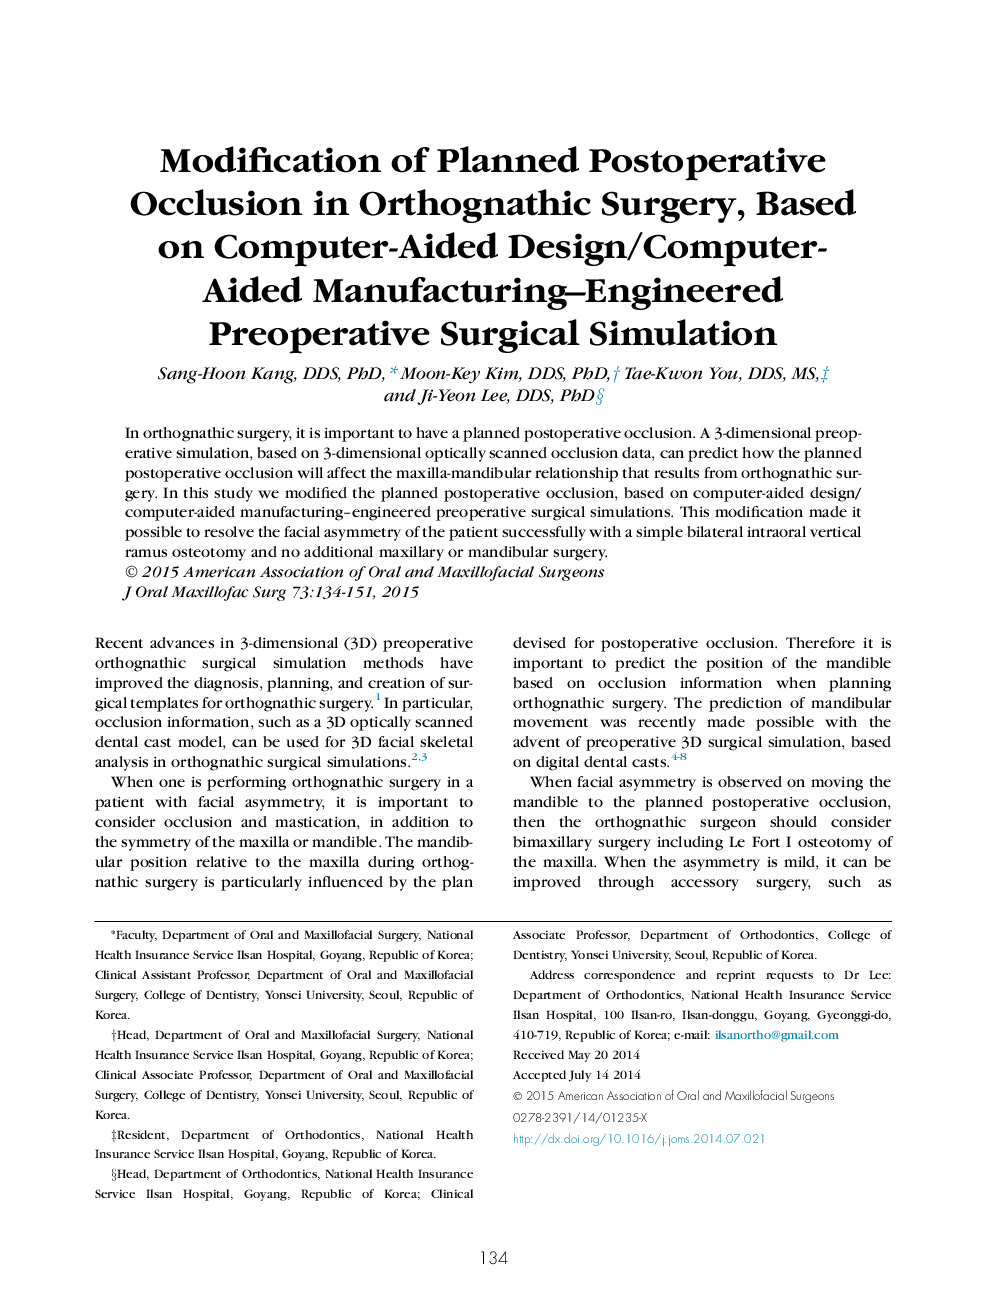 Modification of Planned Postoperative Occlusion in Orthognathic Surgery, Based on Computer-Aided Design/Computer-Aided Manufacturing–Engineered Preoperative Surgical Simulation